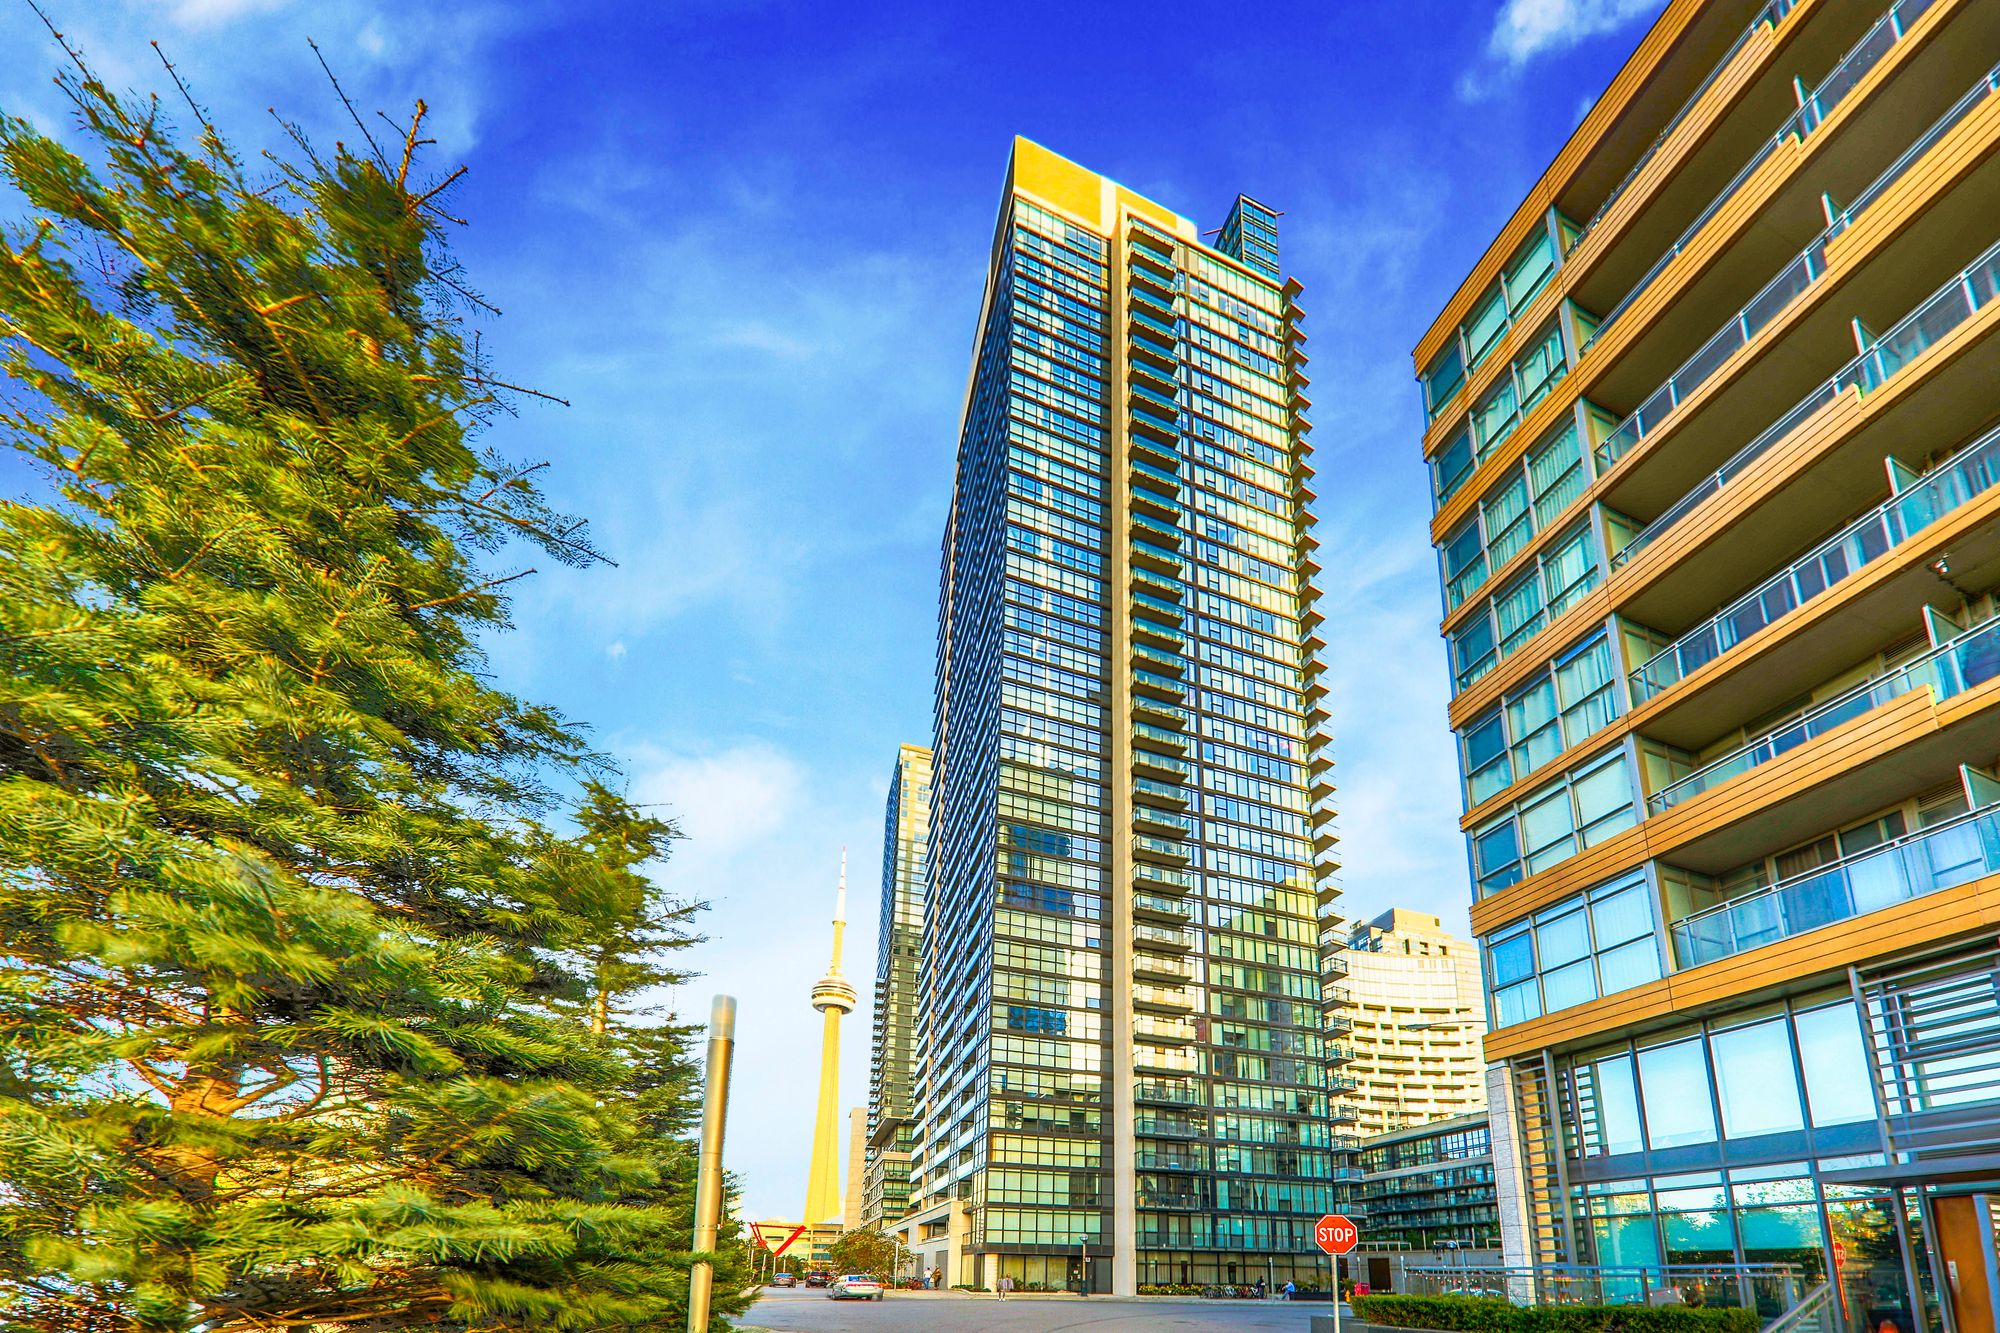 25 Capreol Crt. This condo at Luna Vista Condos is located in  Downtown, Toronto - image #2 of 5 by Strata.ca